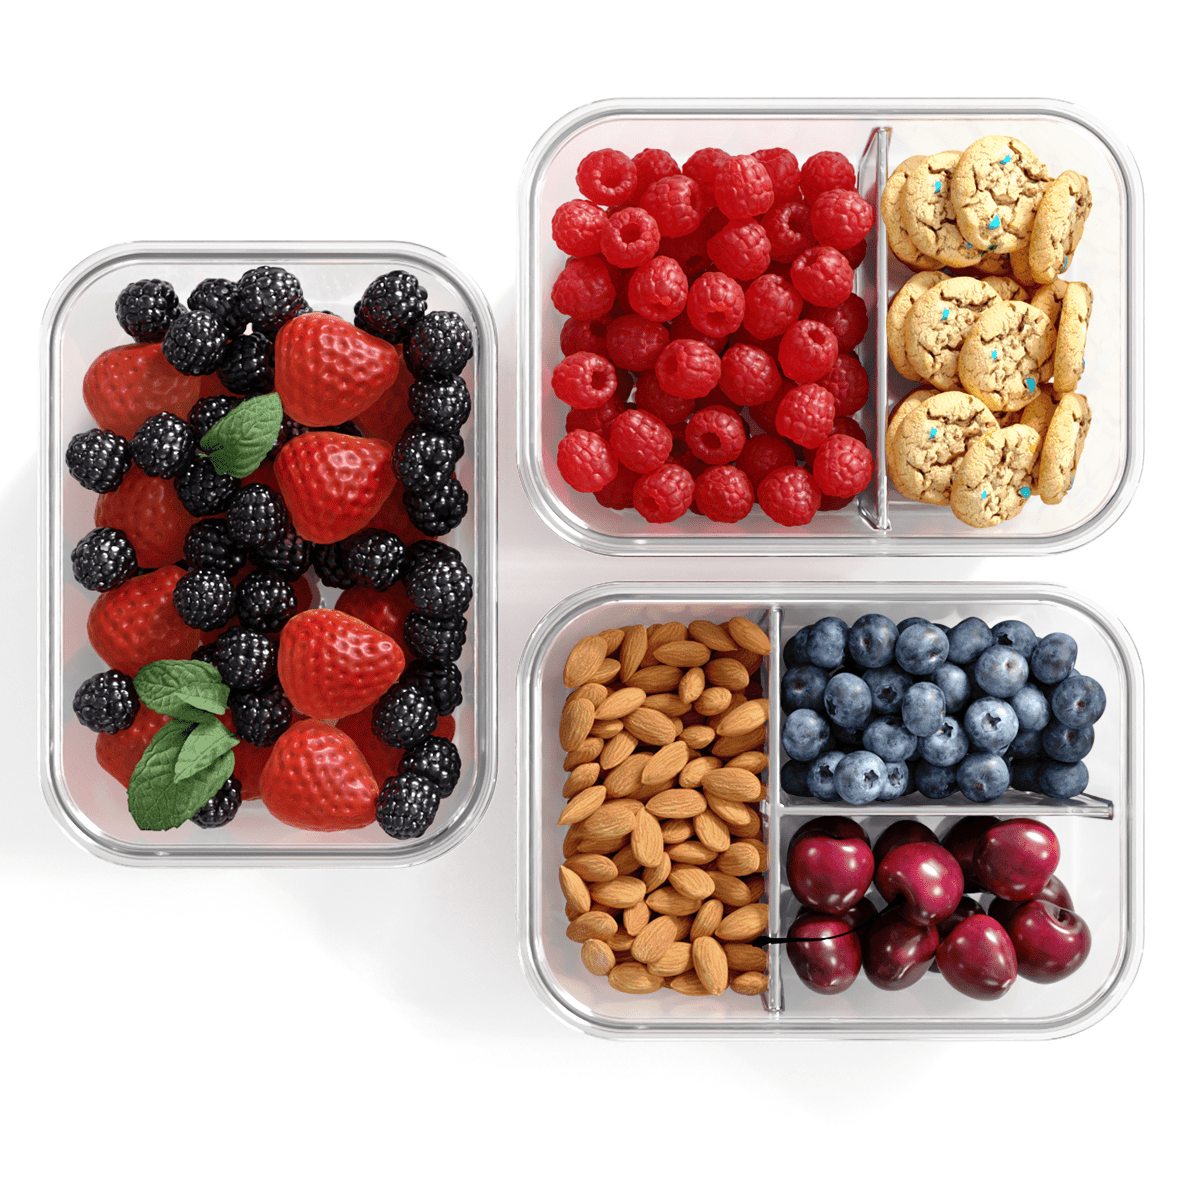 Leak-Proof Stainless Steel Food Storage Container Set of 3 Meal Prep Food Container with BPA-Free Lids Metal Fresh Storage Container for Freezer Oven